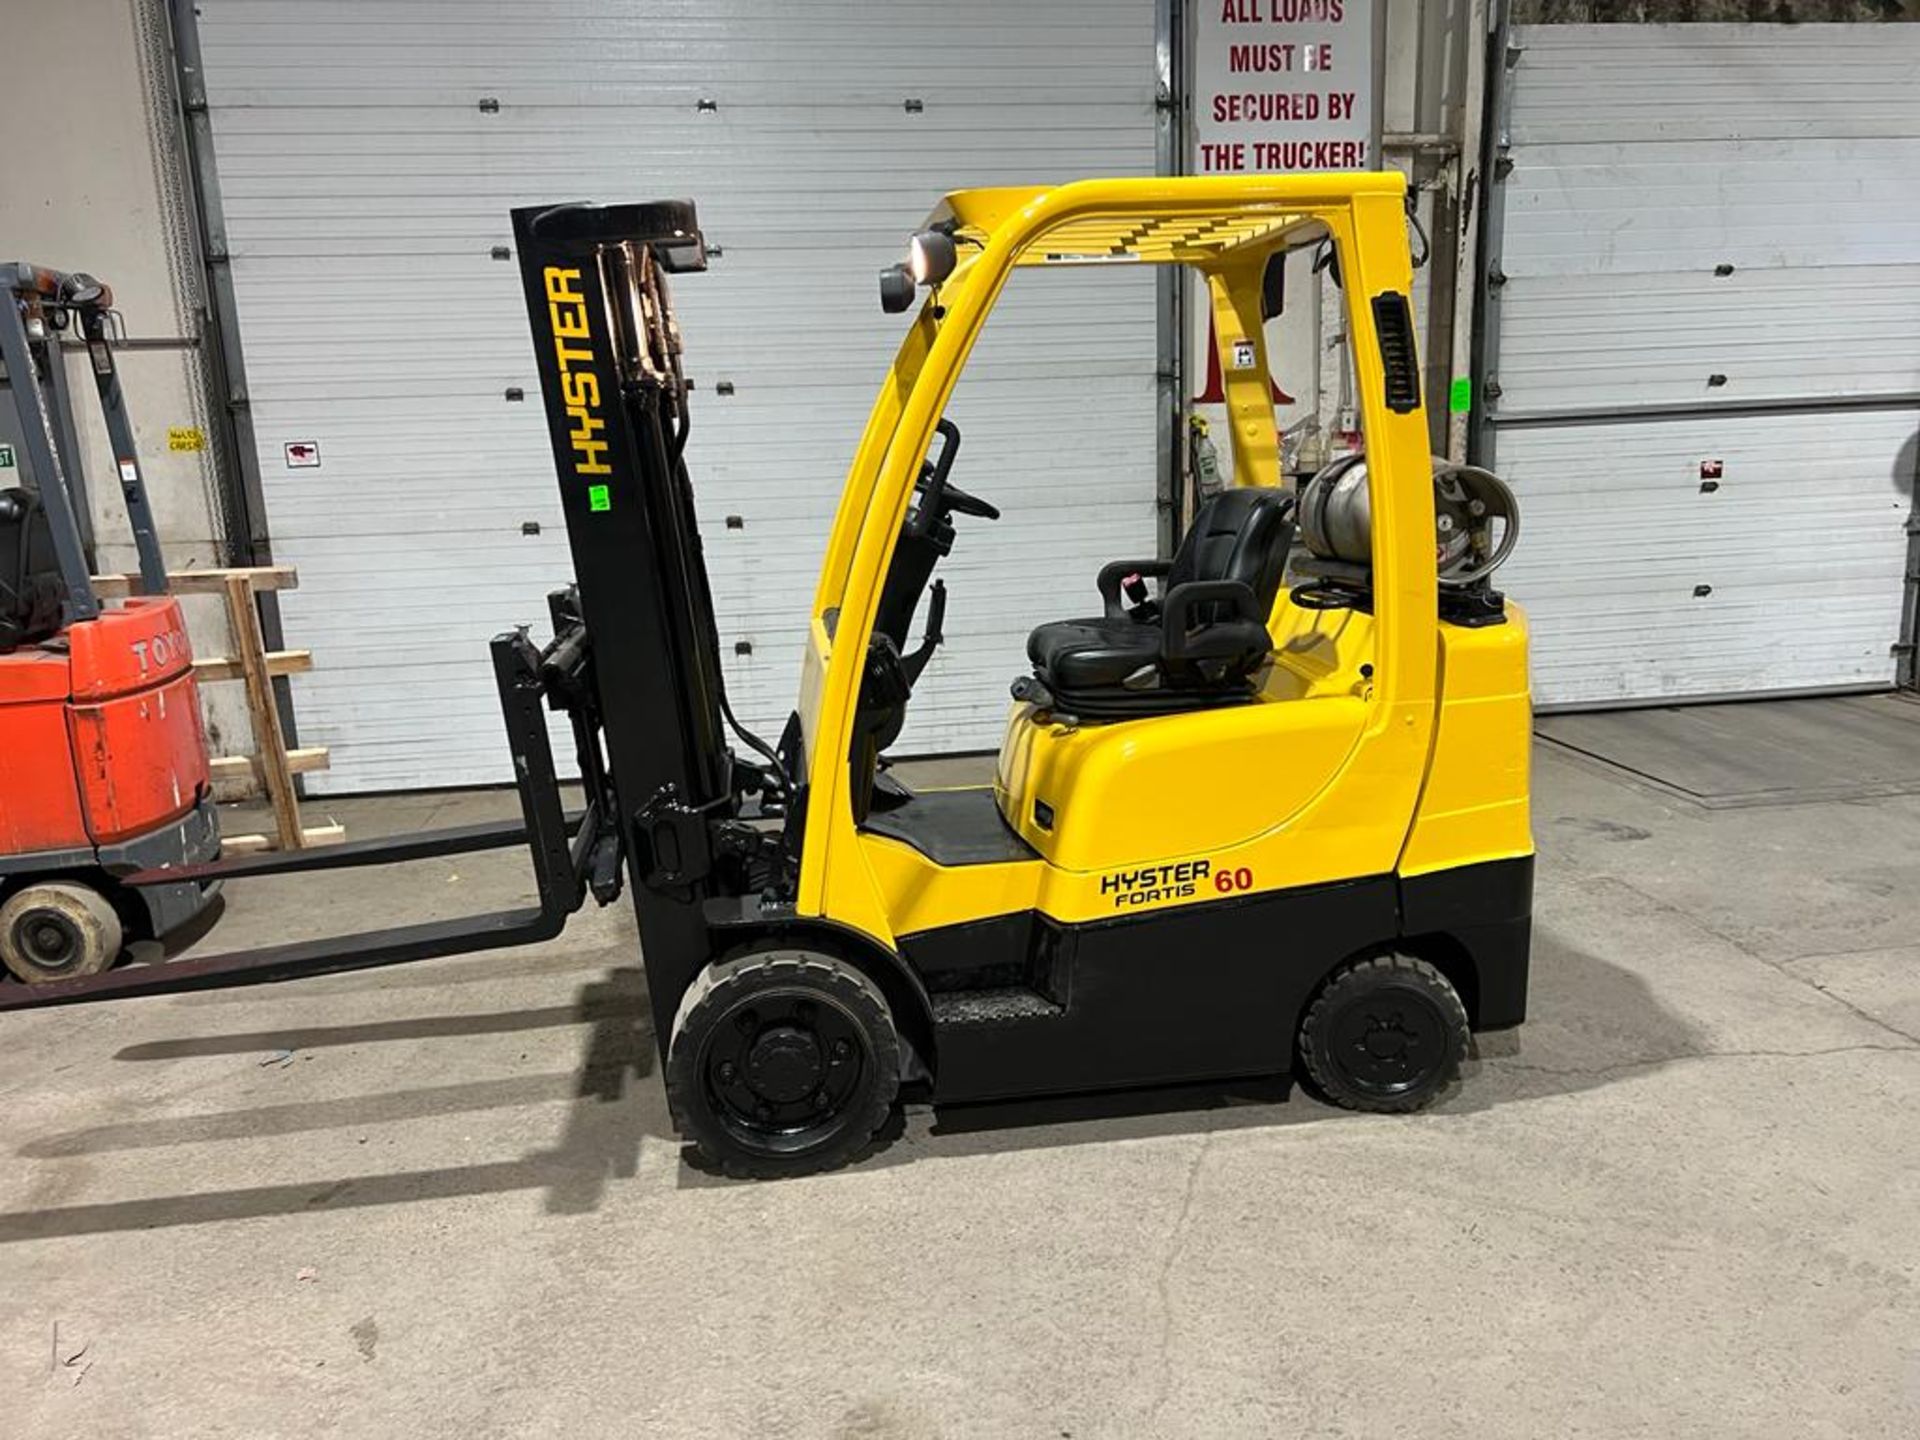 NICE Hyster 60 - 6,000lbs Capacity Forklift LPG (propane) NEW 48" forks with Sideshift 3-stage